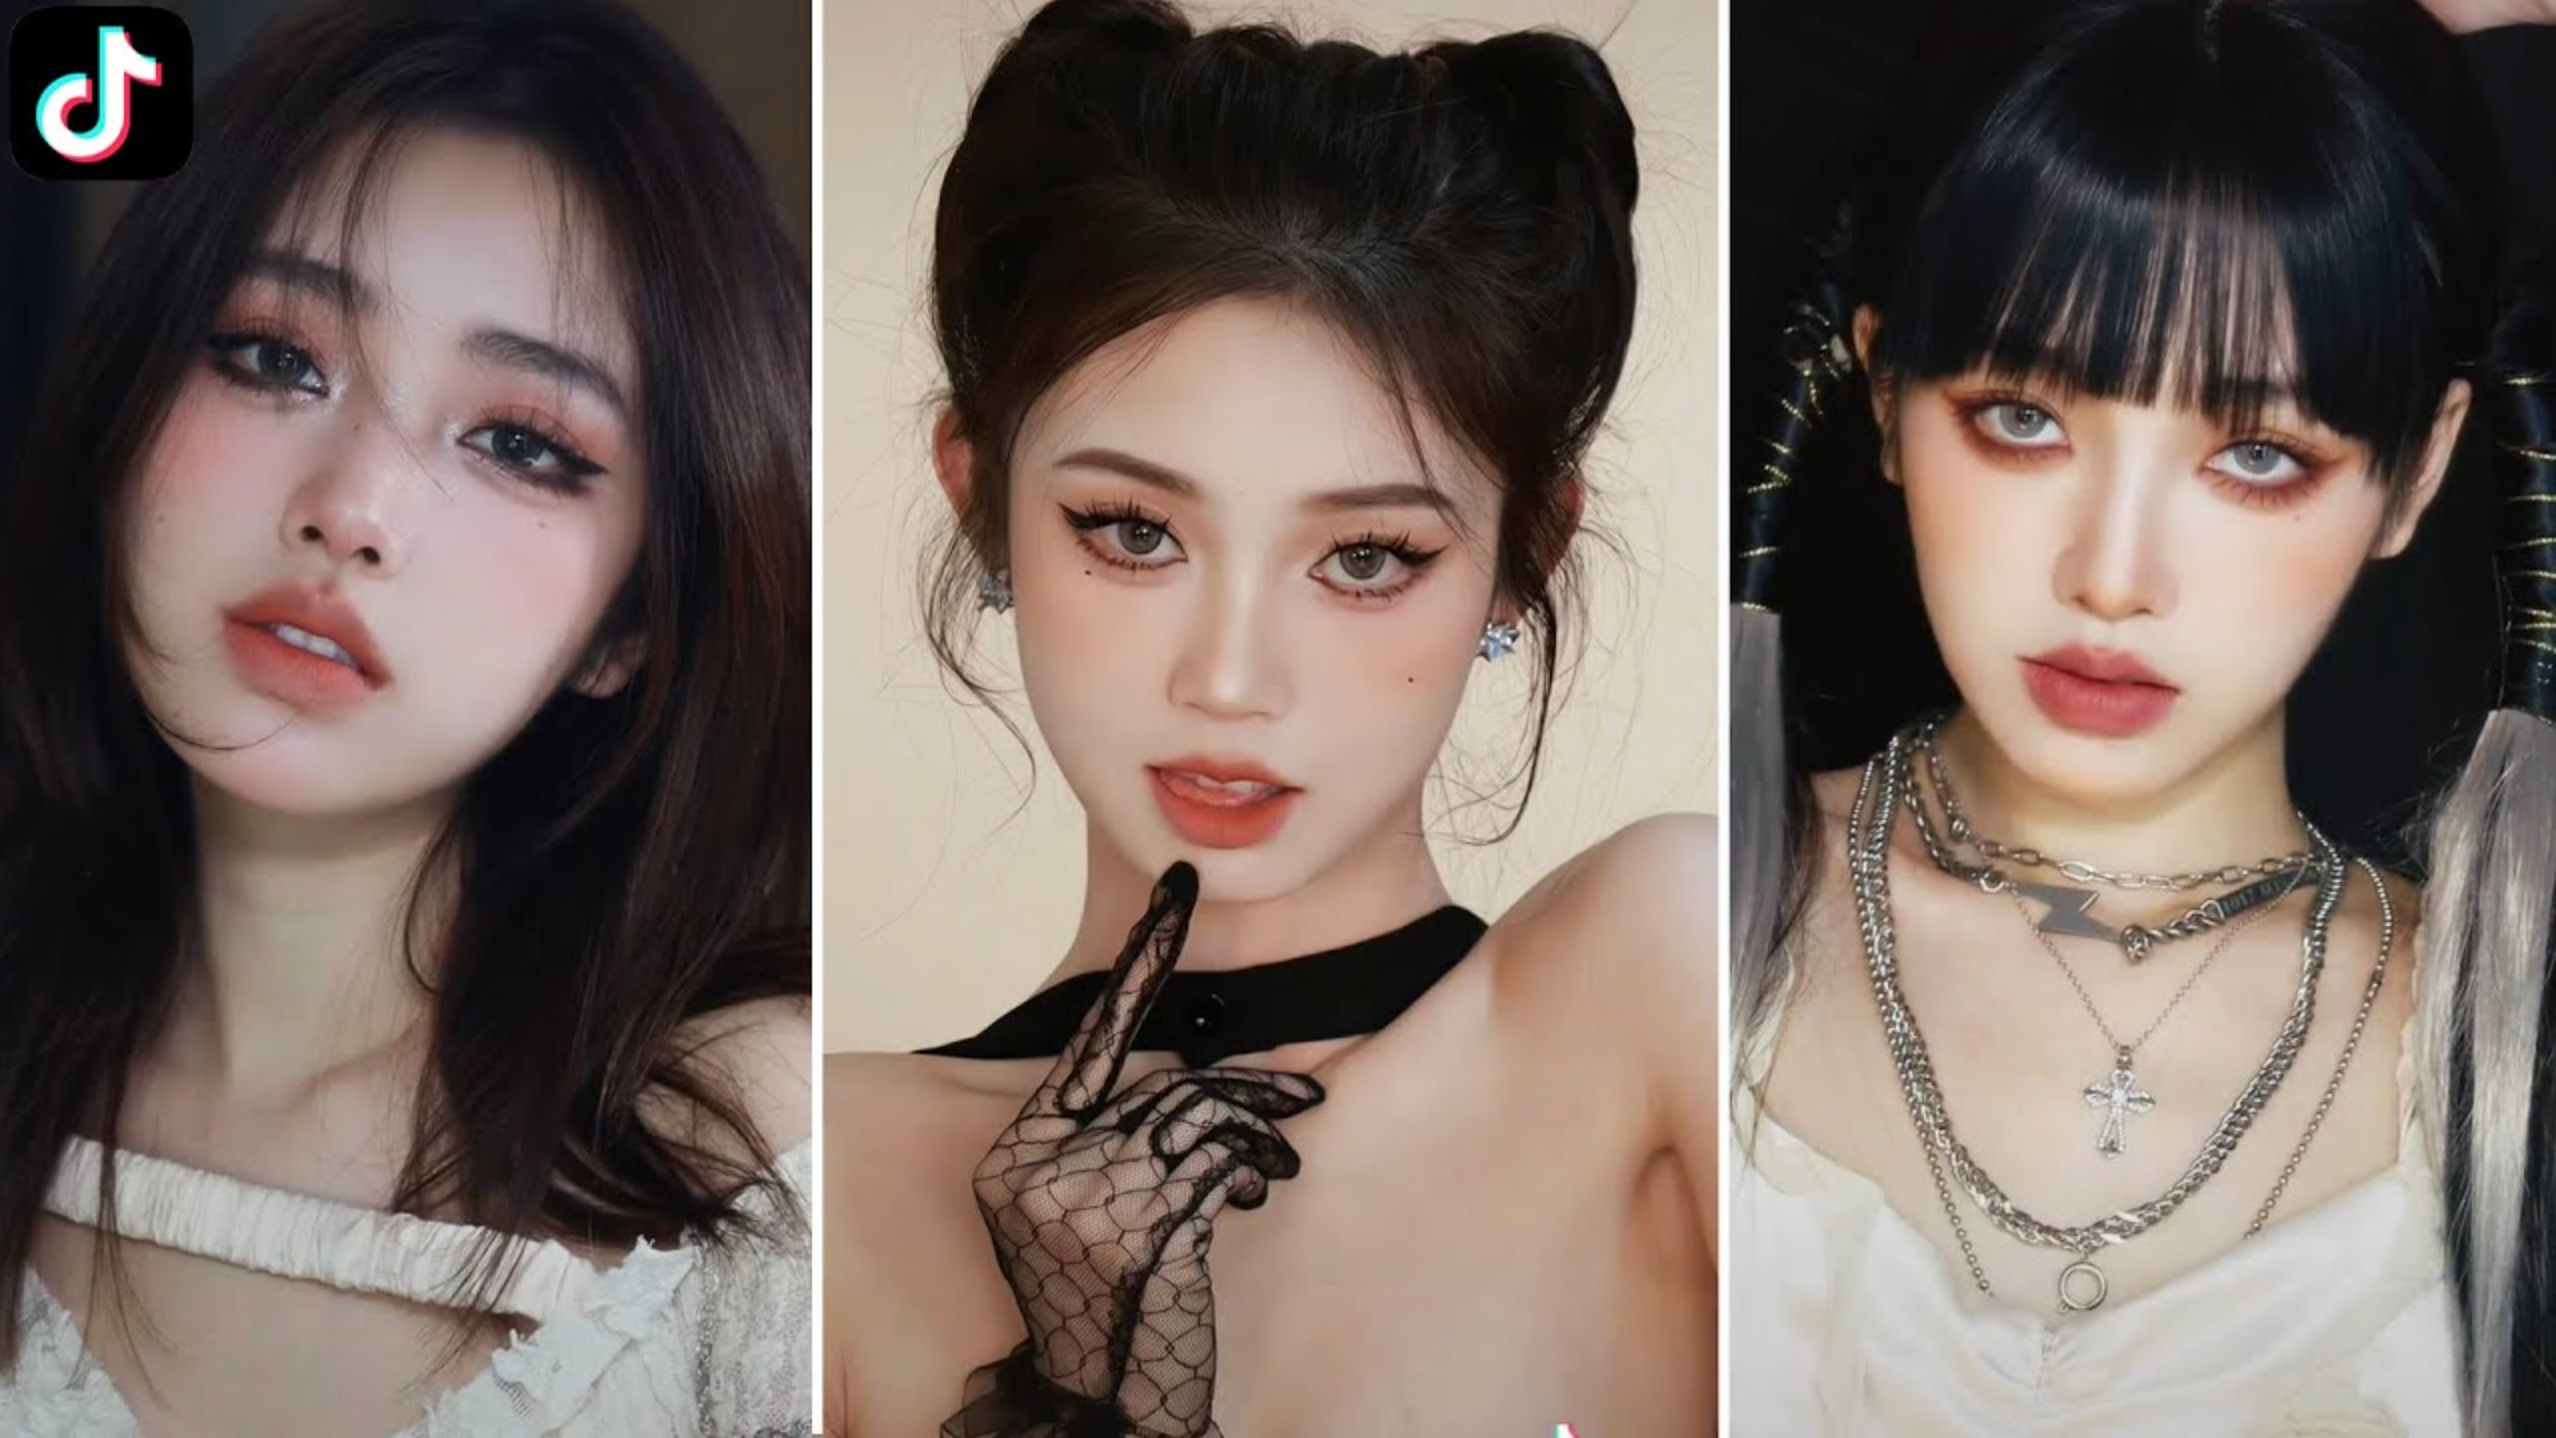 “Douyin makeup” tutorials have been making waves across Tiktok. What is it and why is it so popular? Photo: Youtube via @tiktokdouyin9927